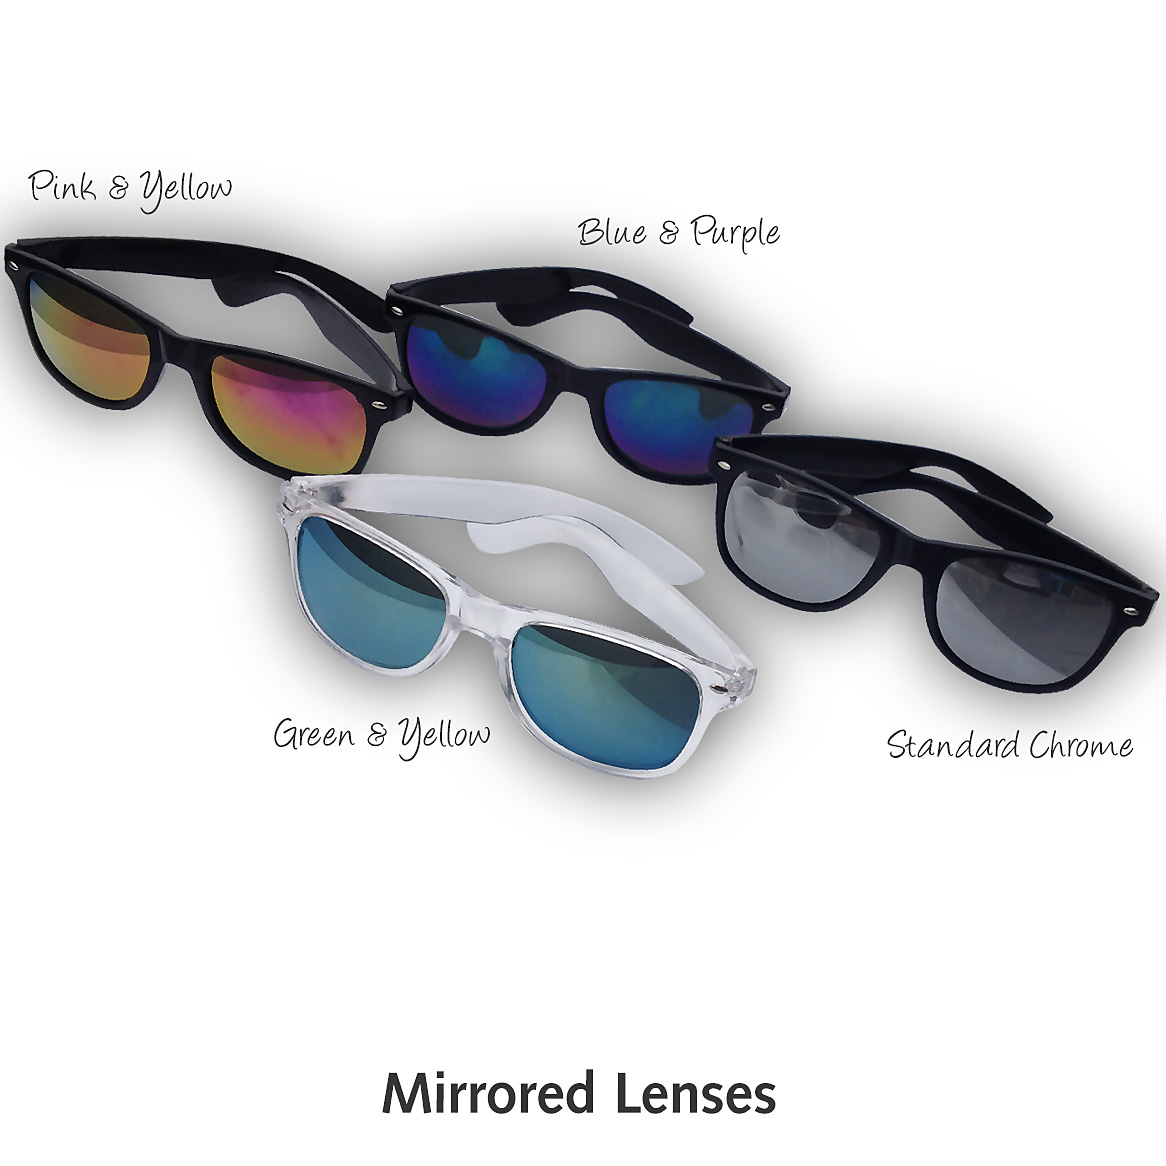 Promotional Sunglasses with Mirrored Lenses